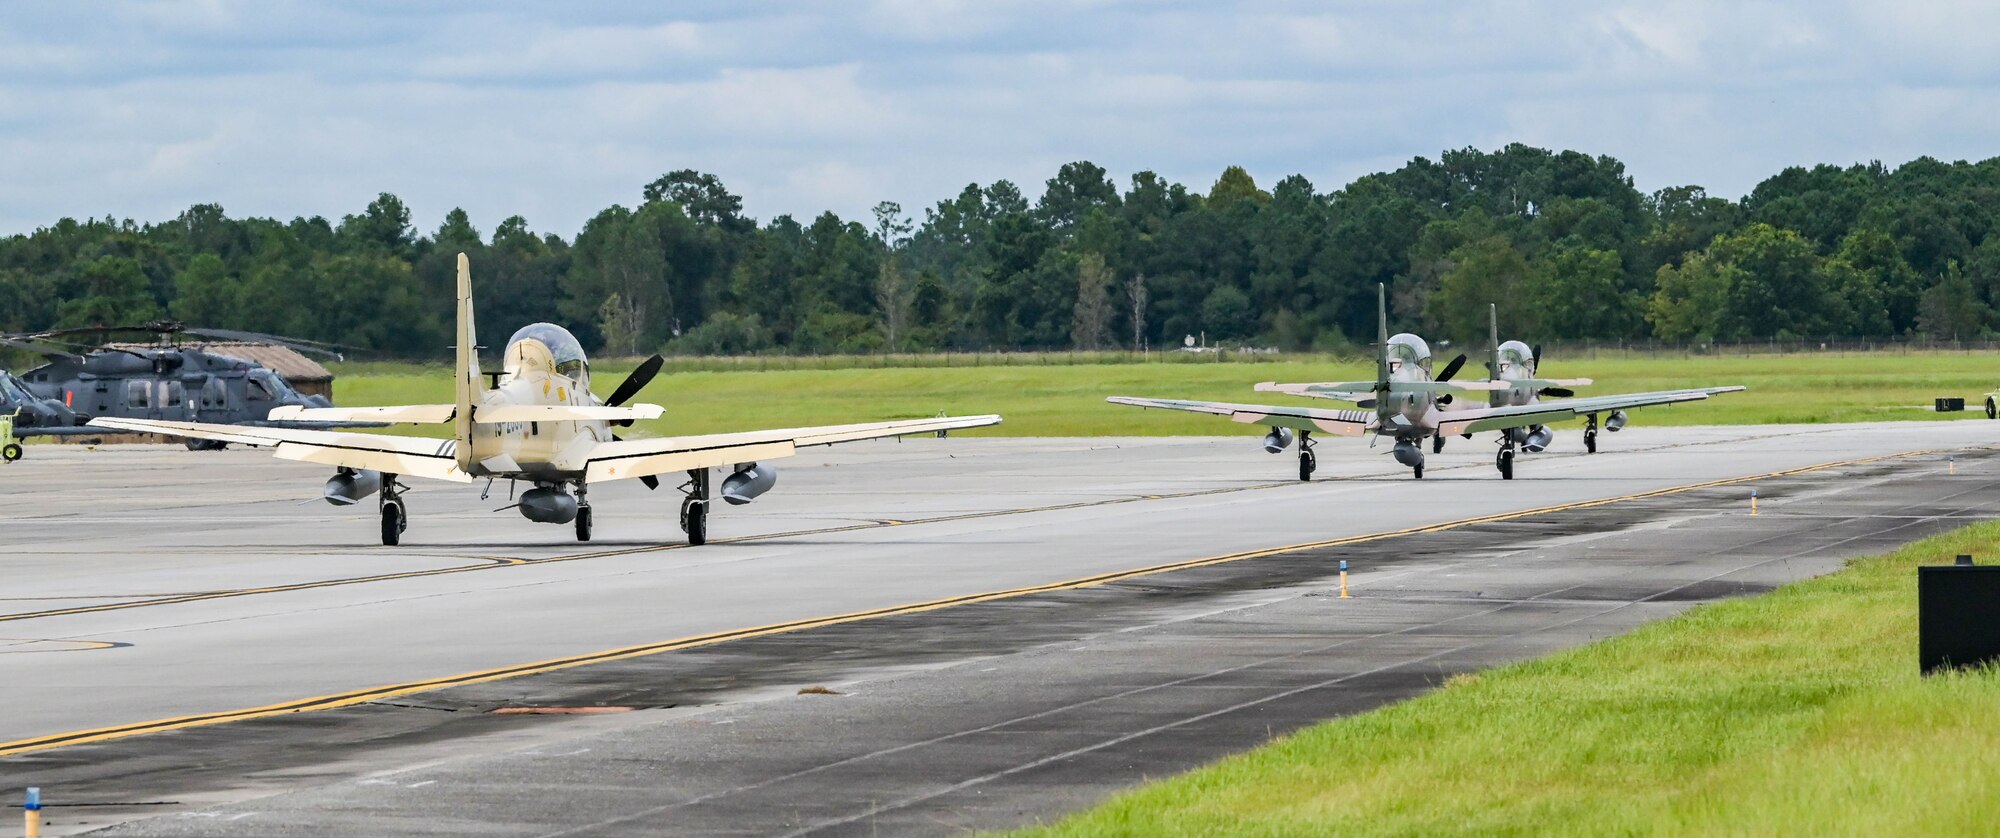 An A-29 Super Tucano aircraft pilot taxis down the runway to depart Moody Air Force Base, Georgia, Sept. 15, 2021. The U.S. government sold 12 A-29 aircraft to the Nigerian Air Force to enhance their capabilities in providing national security for Nigeria. (U.S. Air Force photo by Senior Airman Rebeckah Medeiros)